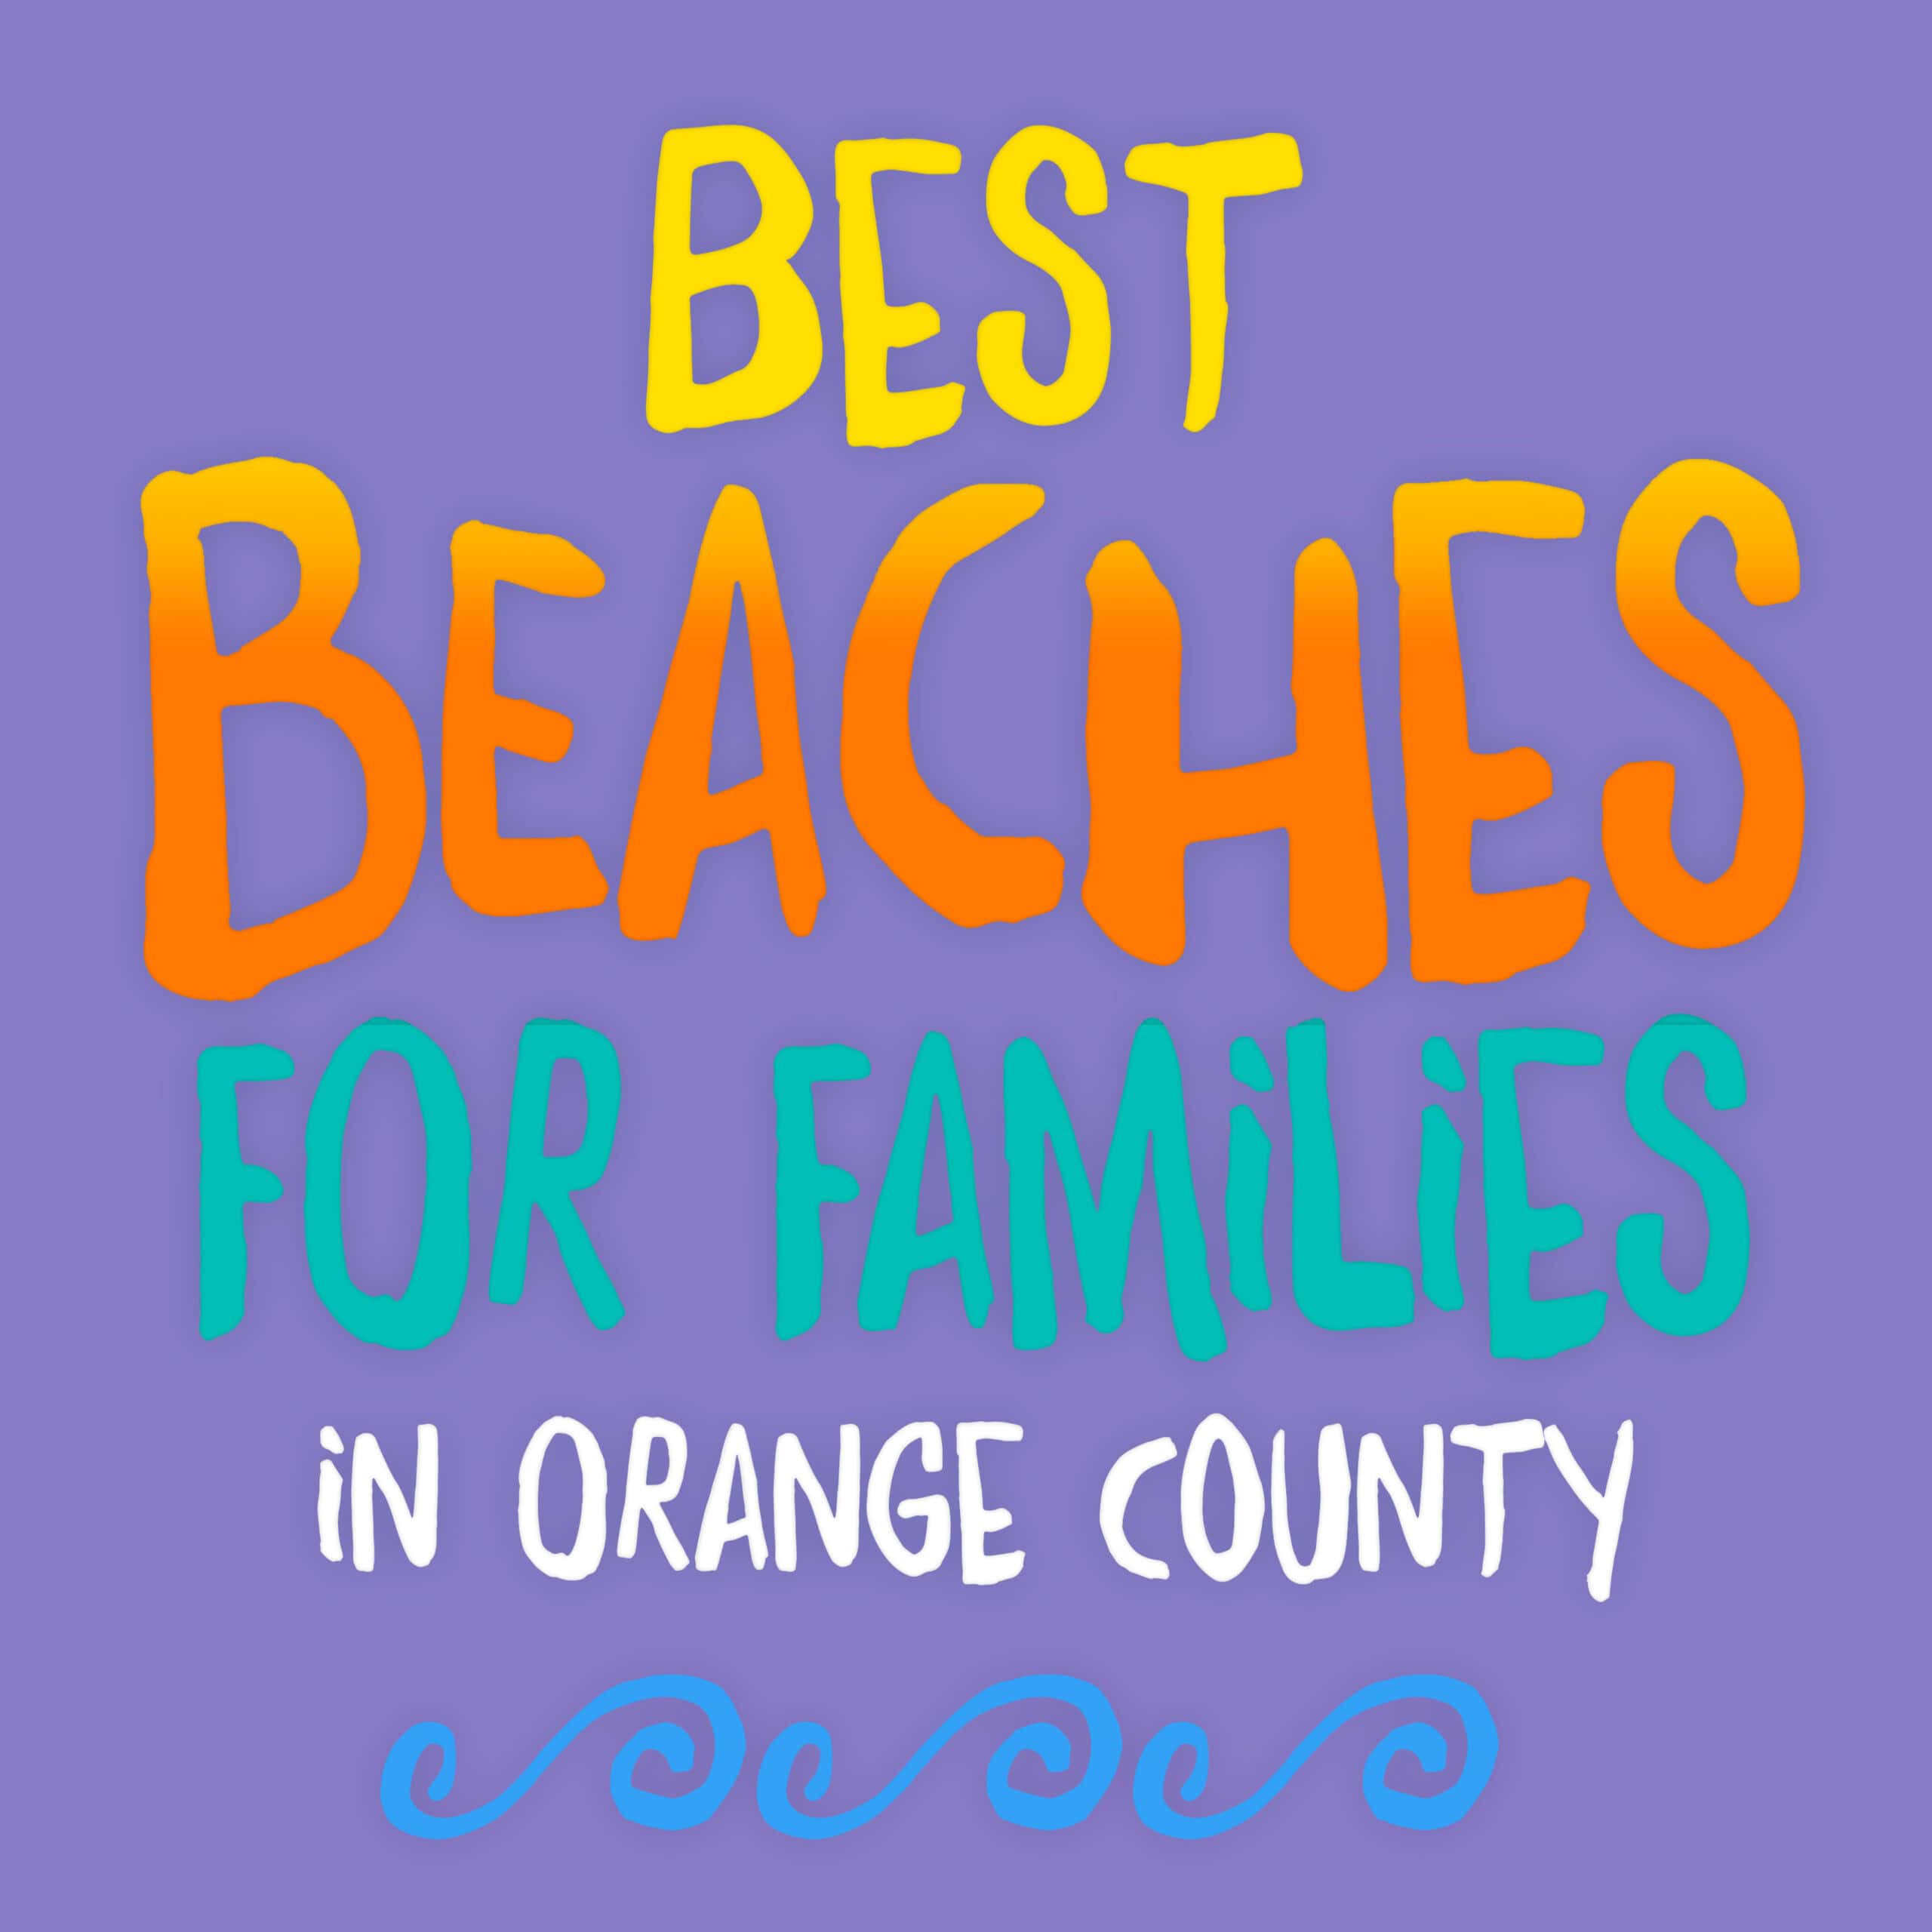 Best Beaches for Families in Orange County California